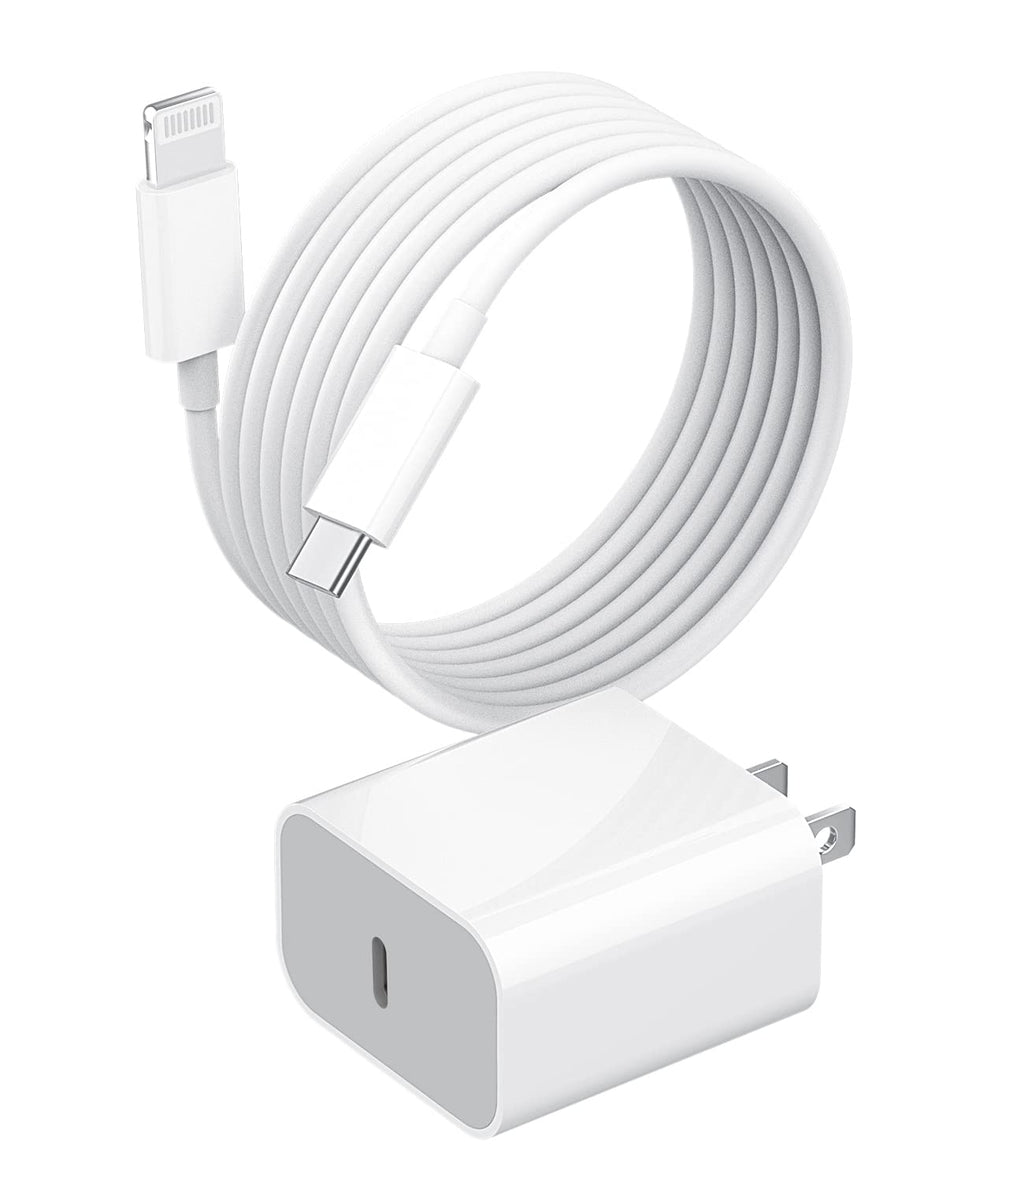  [AUSTRALIA] - Apple MFi Certified,USB C Fast PD Wall Charger Block with 5ft Lightning Cable 20w Power Charging Adapter Quick Box for Ipad ARI iPhone 11 12 PRO MAX Mini XS XR SE2 8Plus Airpod Cord Samsung Type Plug